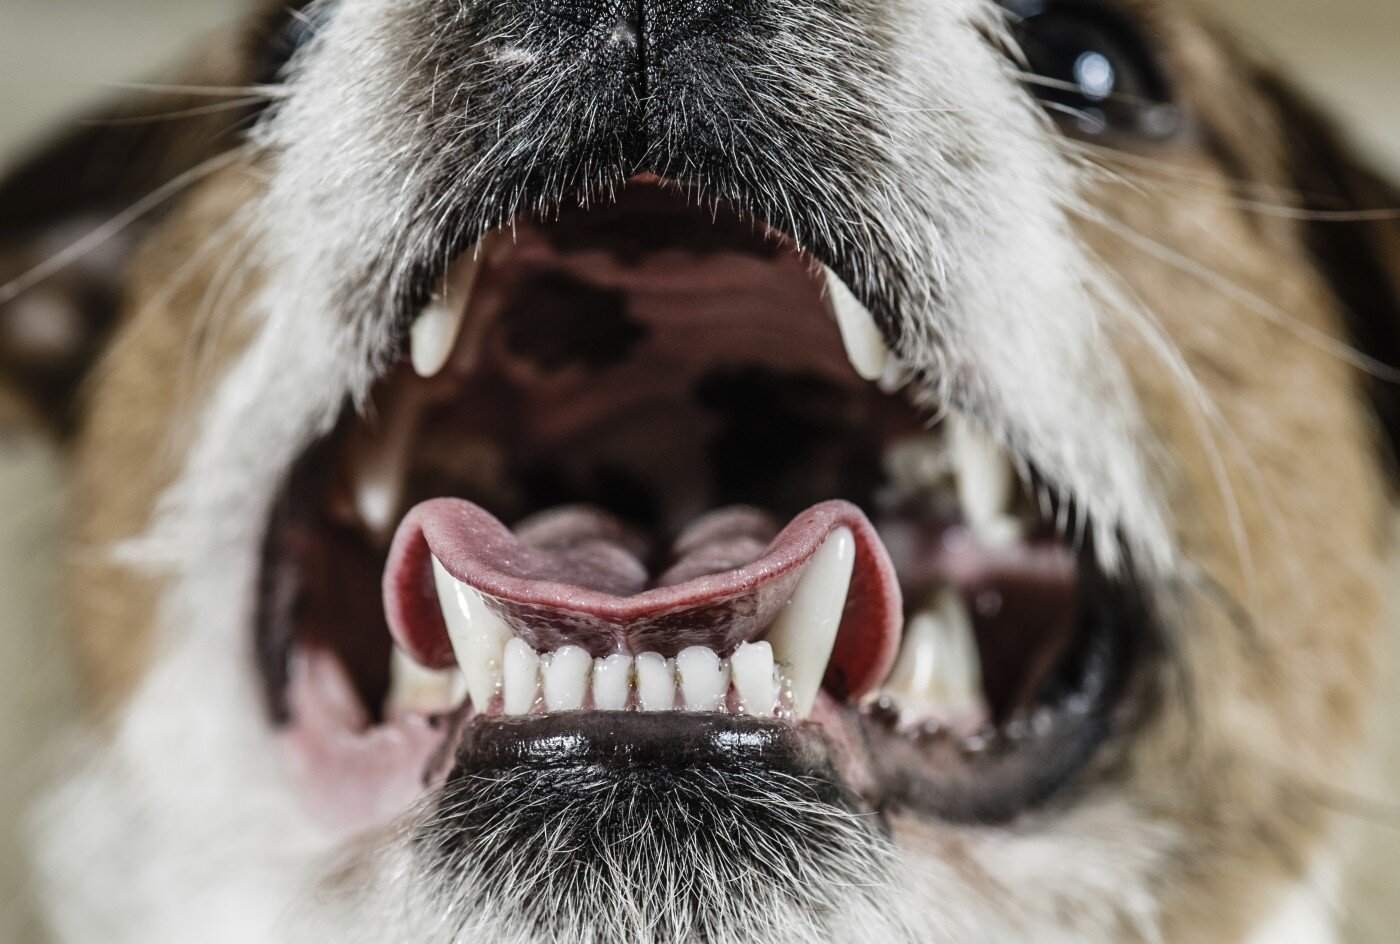 inside the dog's mouth